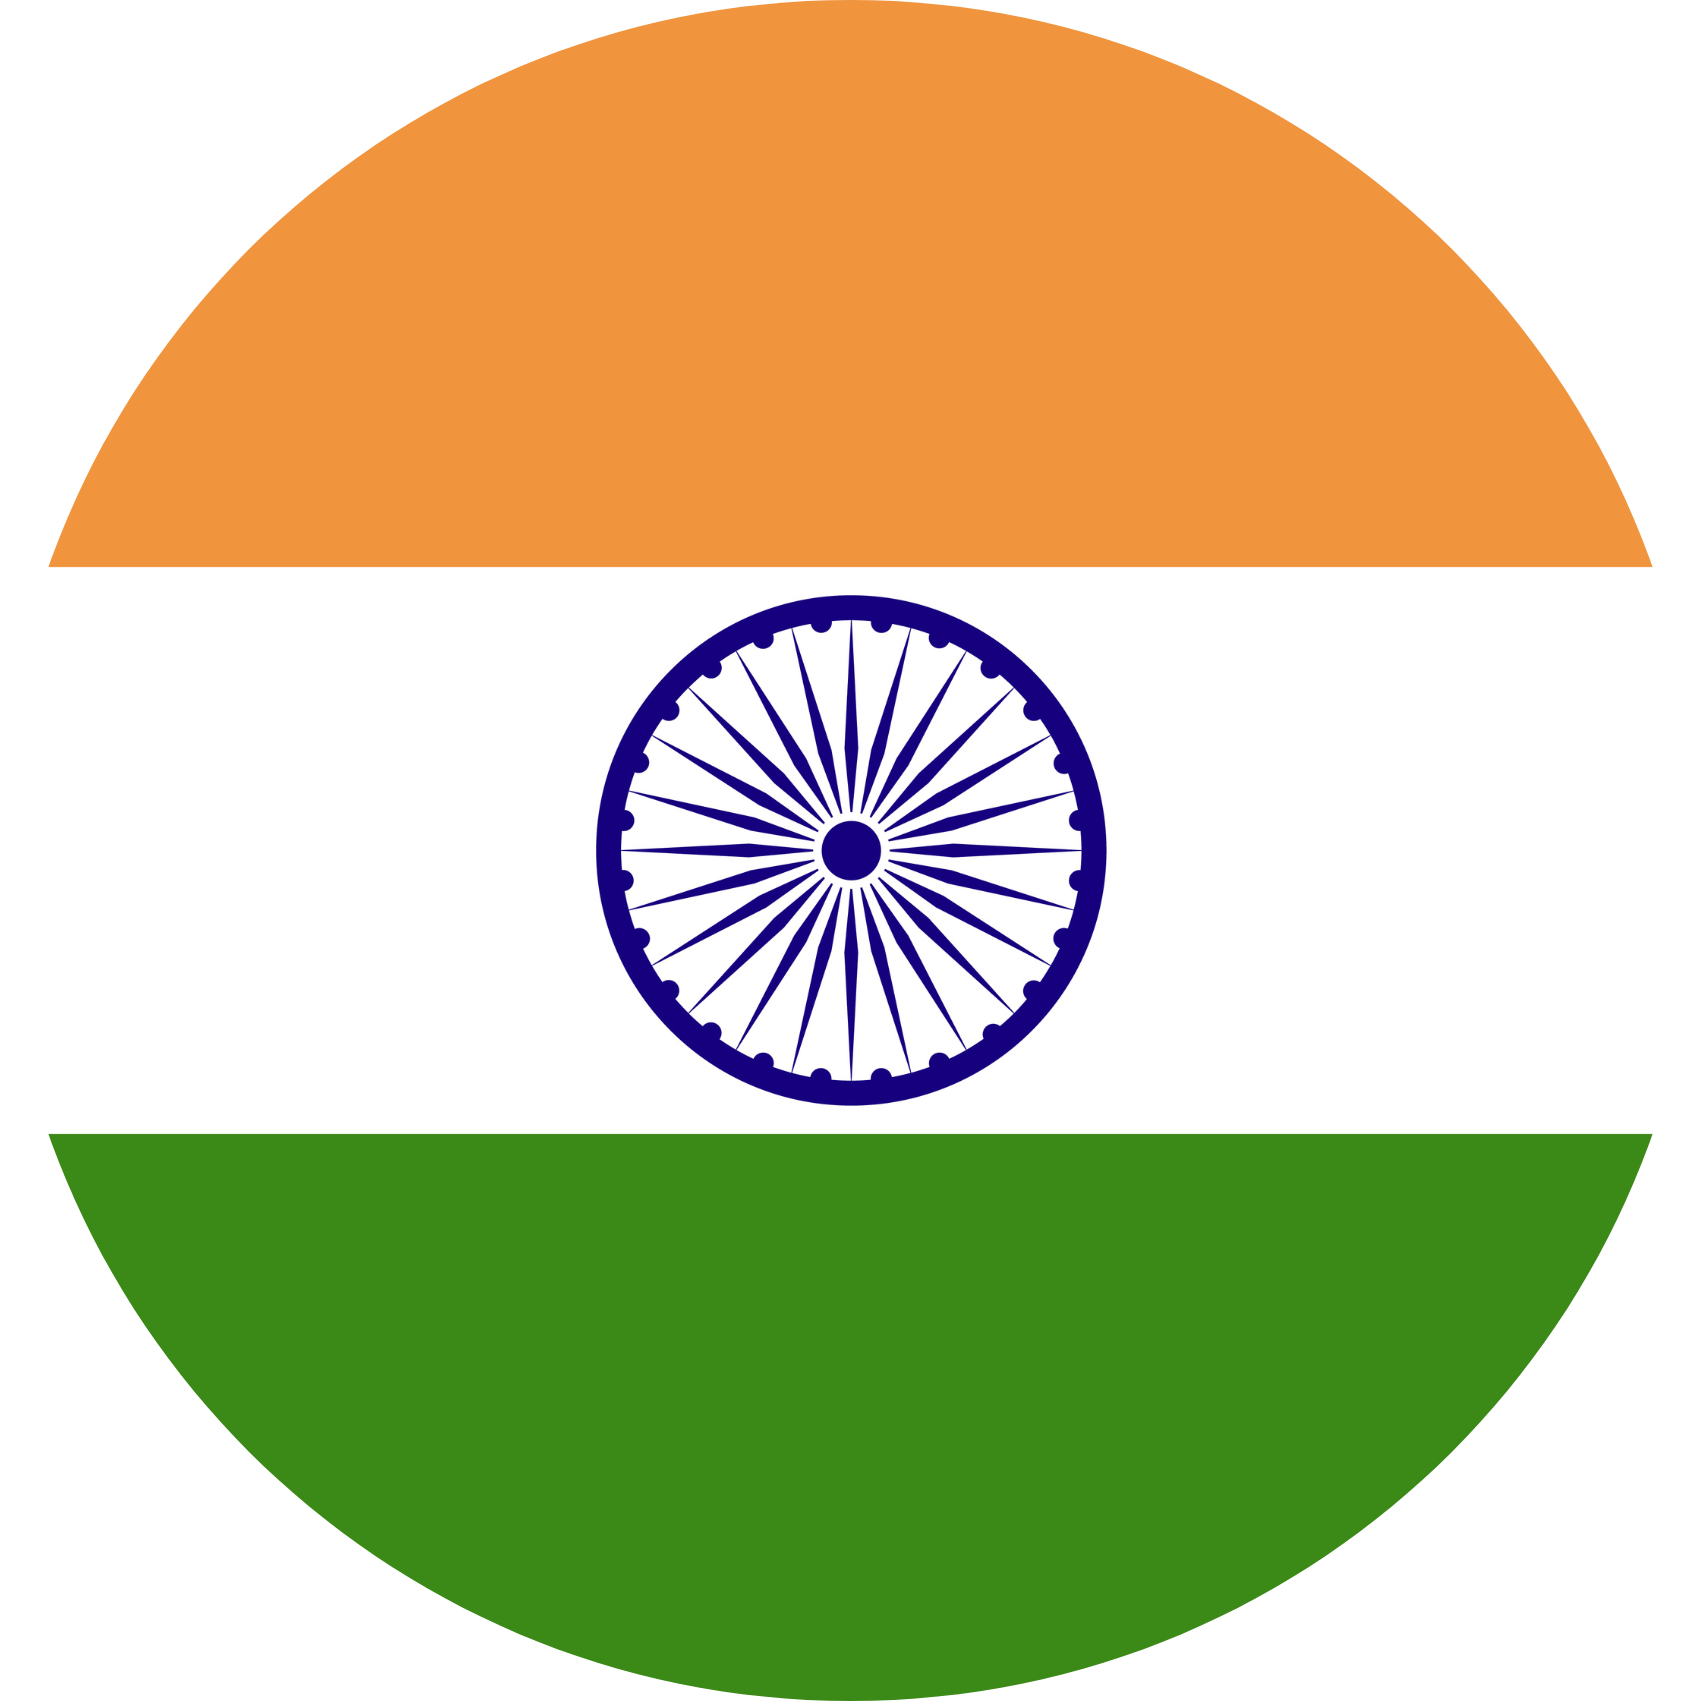 Indian flag inside a circle